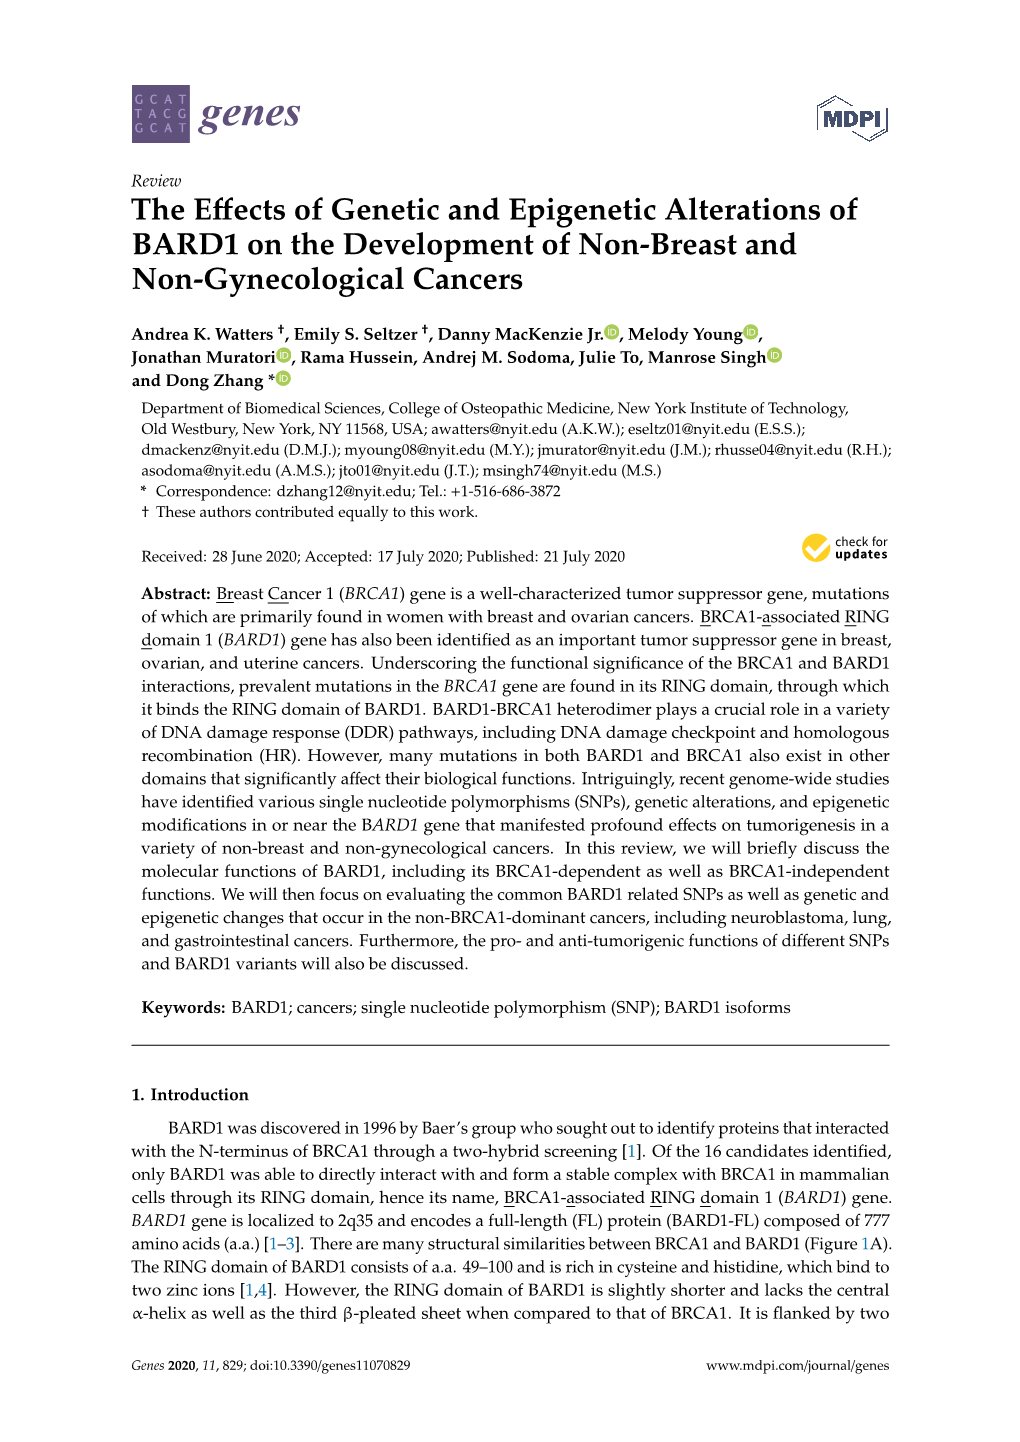 The Effects of Genetic and Epigenetic Alterations of BARD1 on The